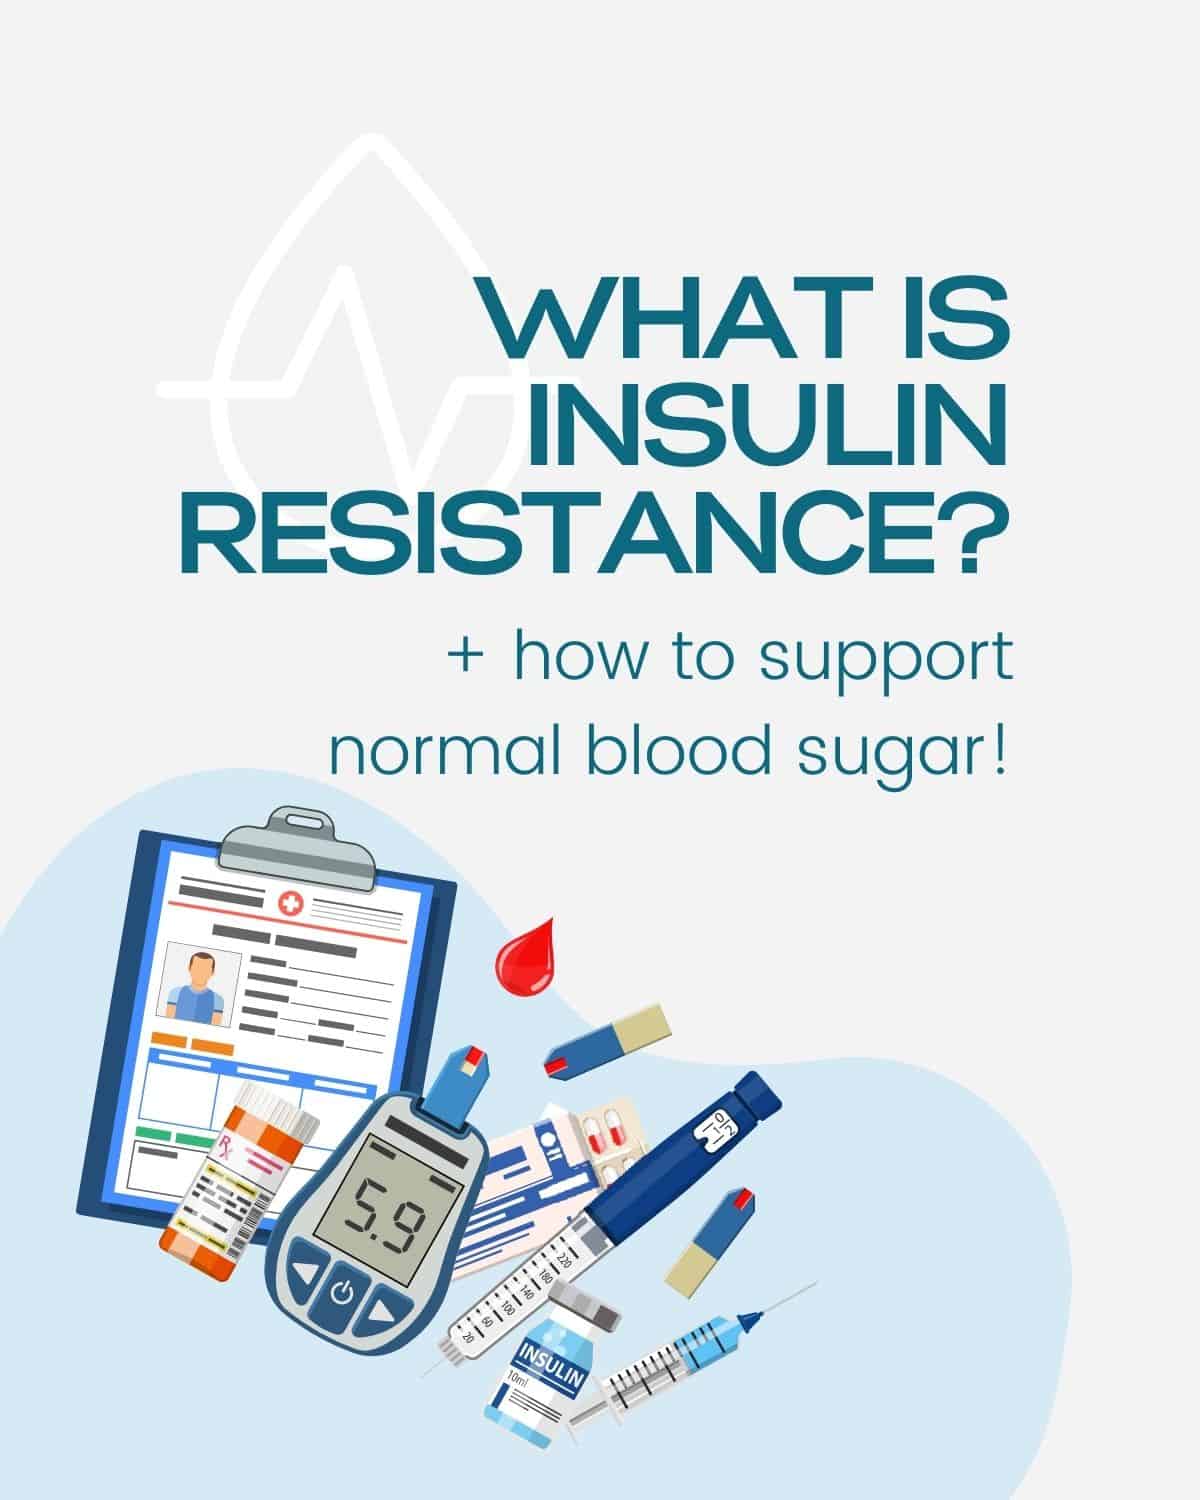 medical supplies with the text "What Is Insulin Resistance?"